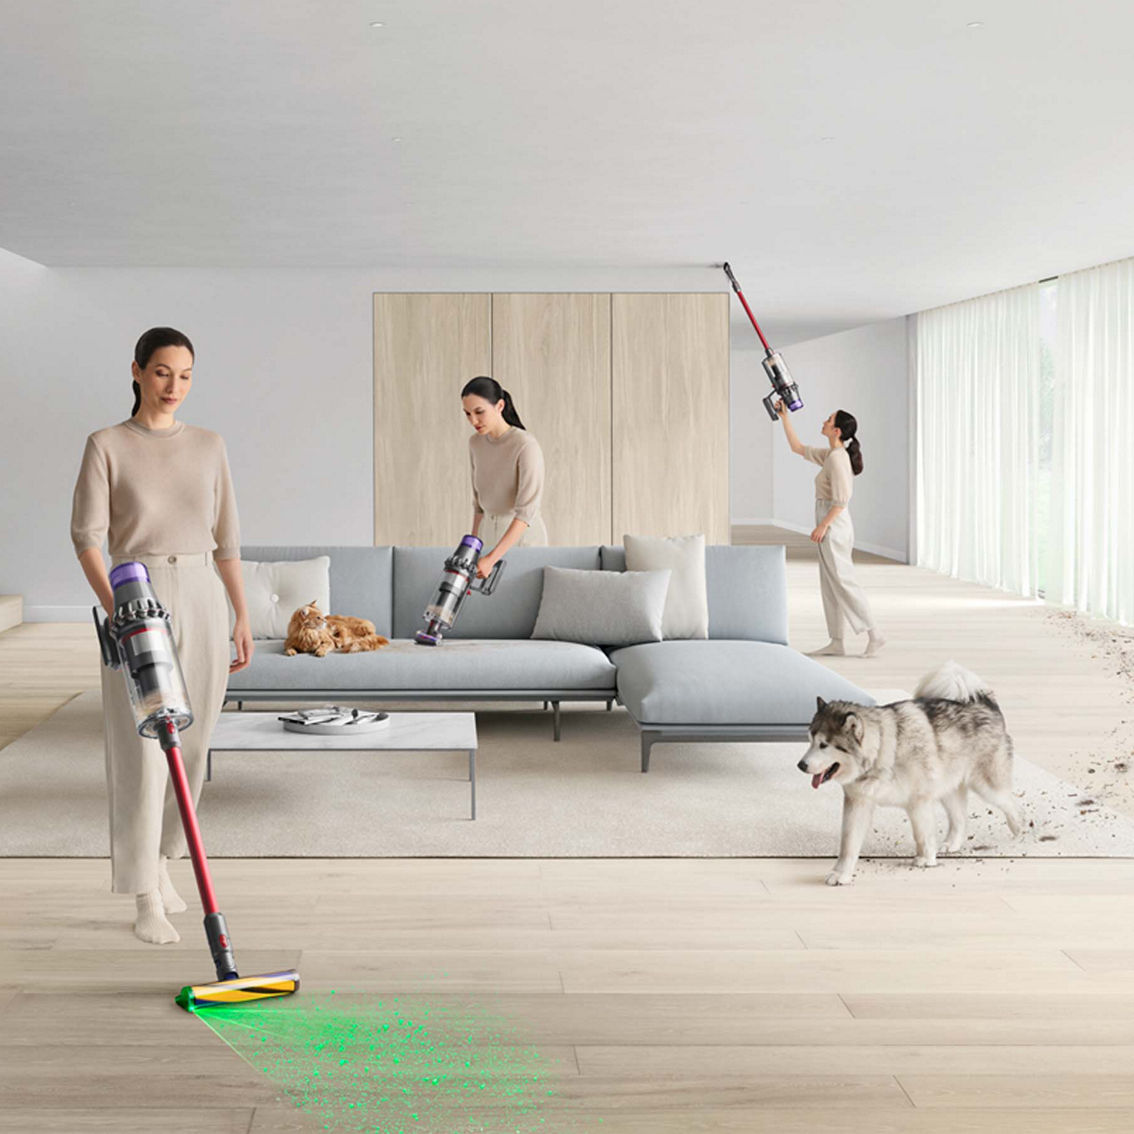 Dyson SV9 Outsize+ Cordless Vacuum Cleaner - Image 2 of 2